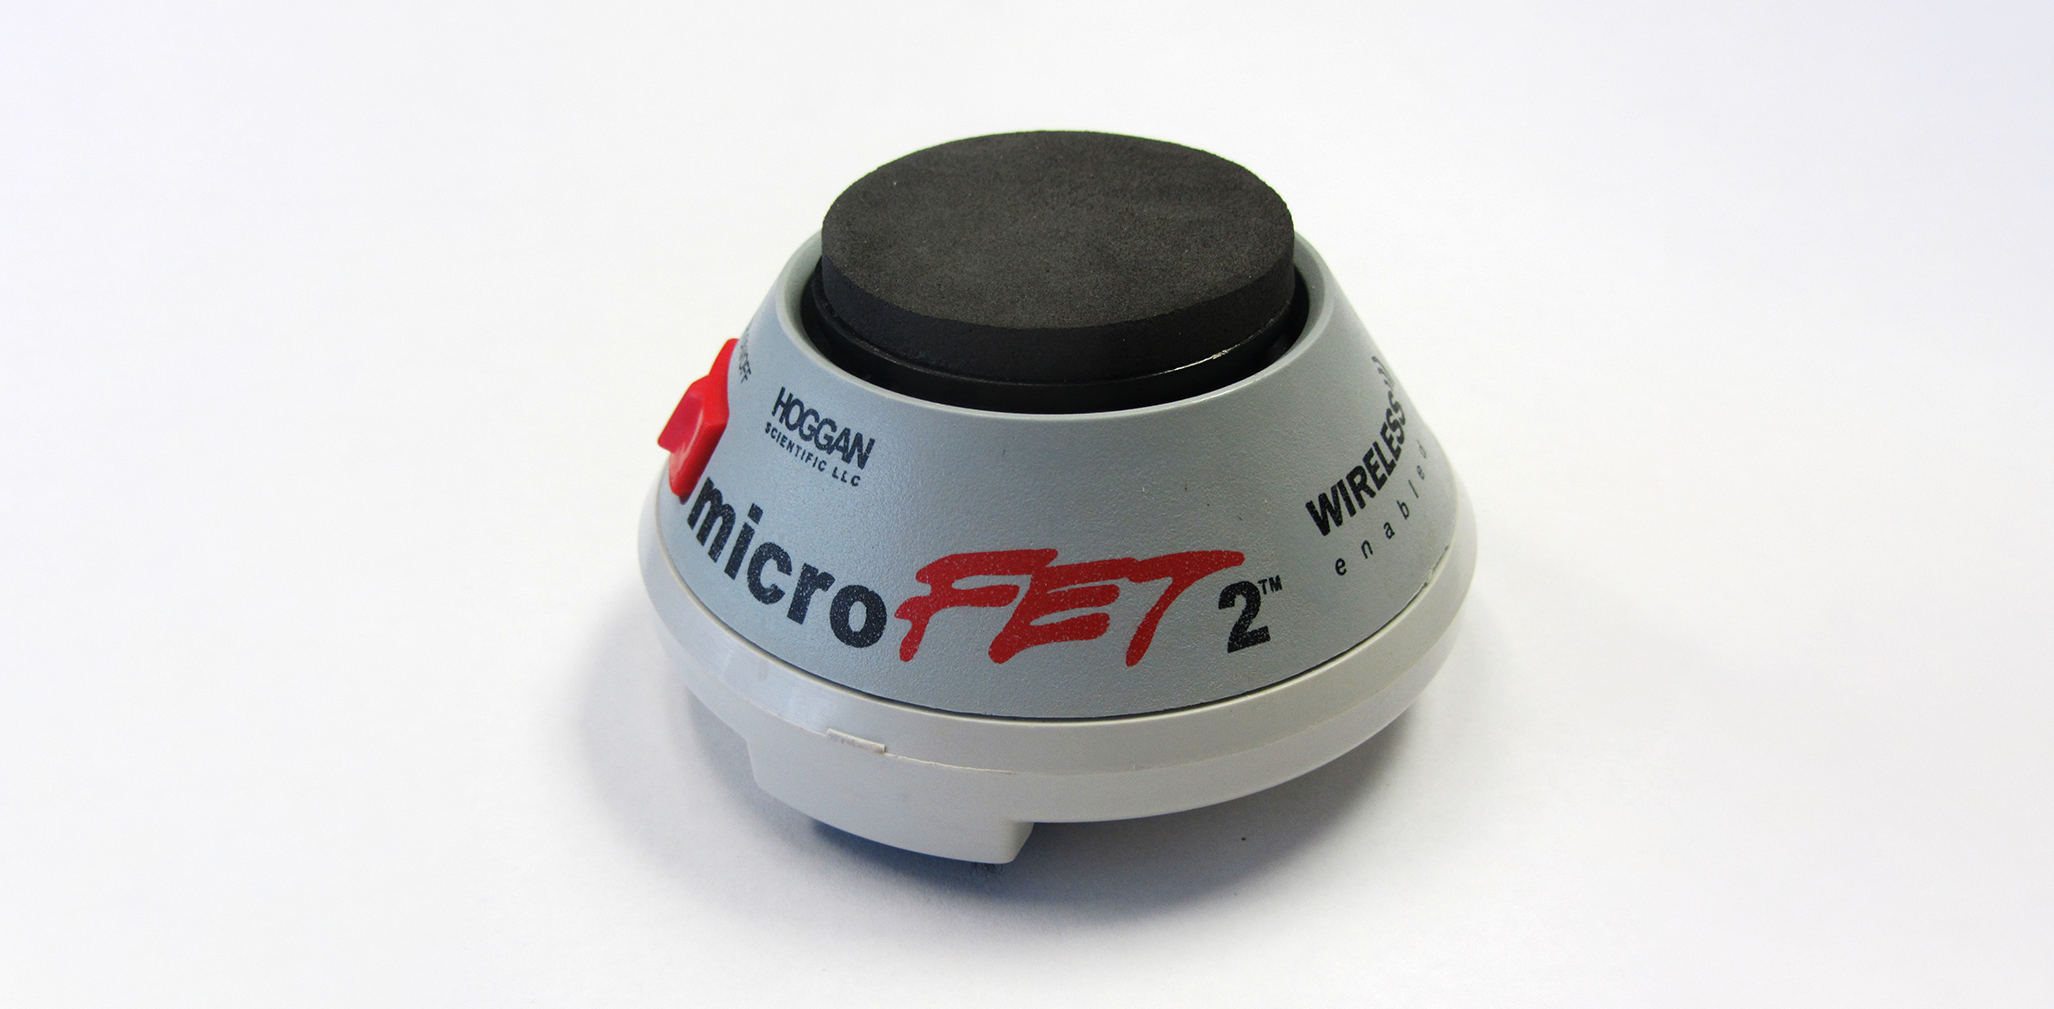 MicroFET™ 2 muscle test dynamometer